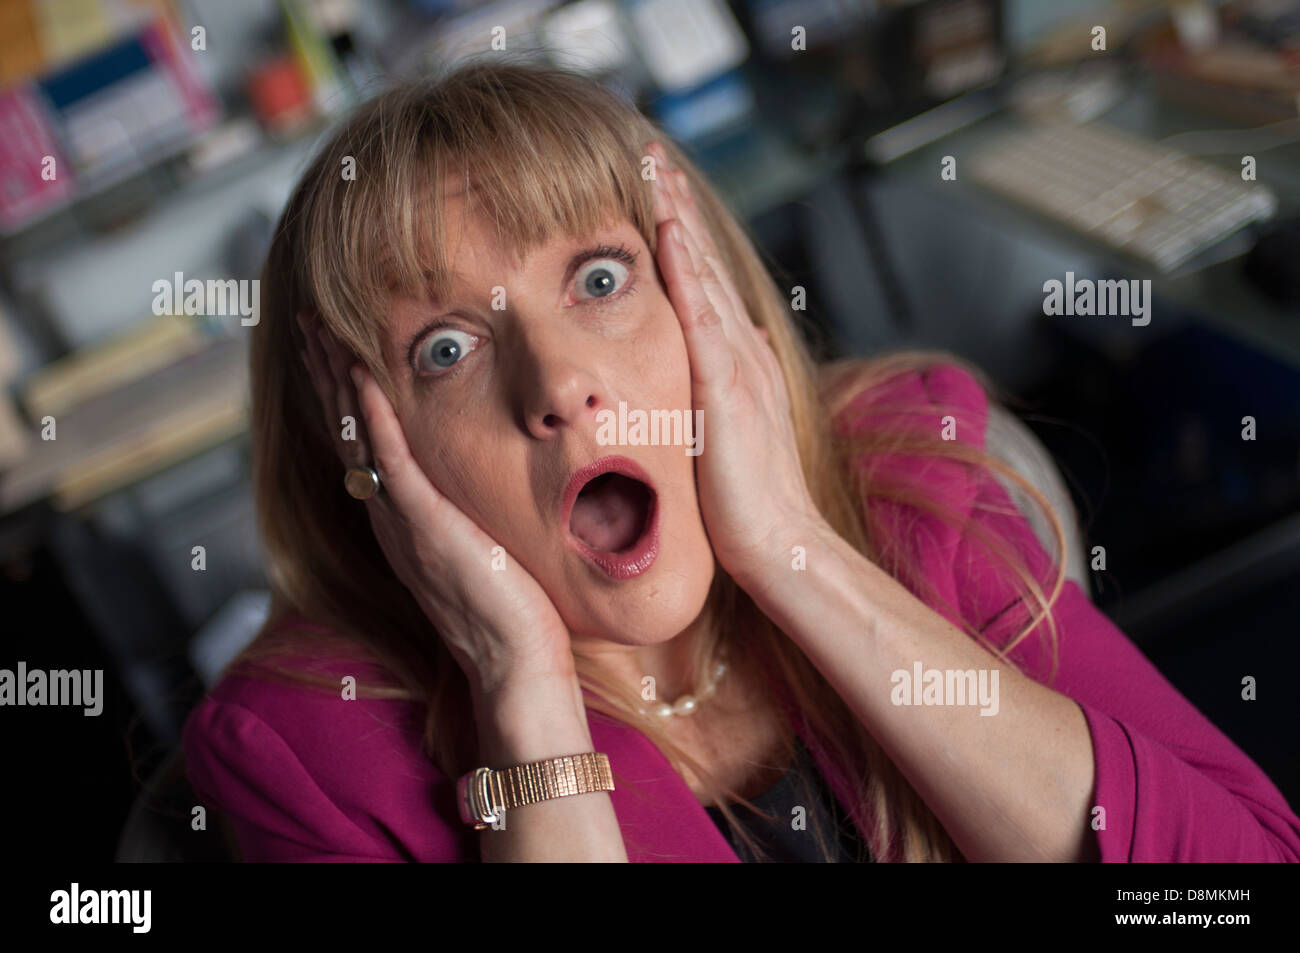 Woman with expression of panic. Stock Photo